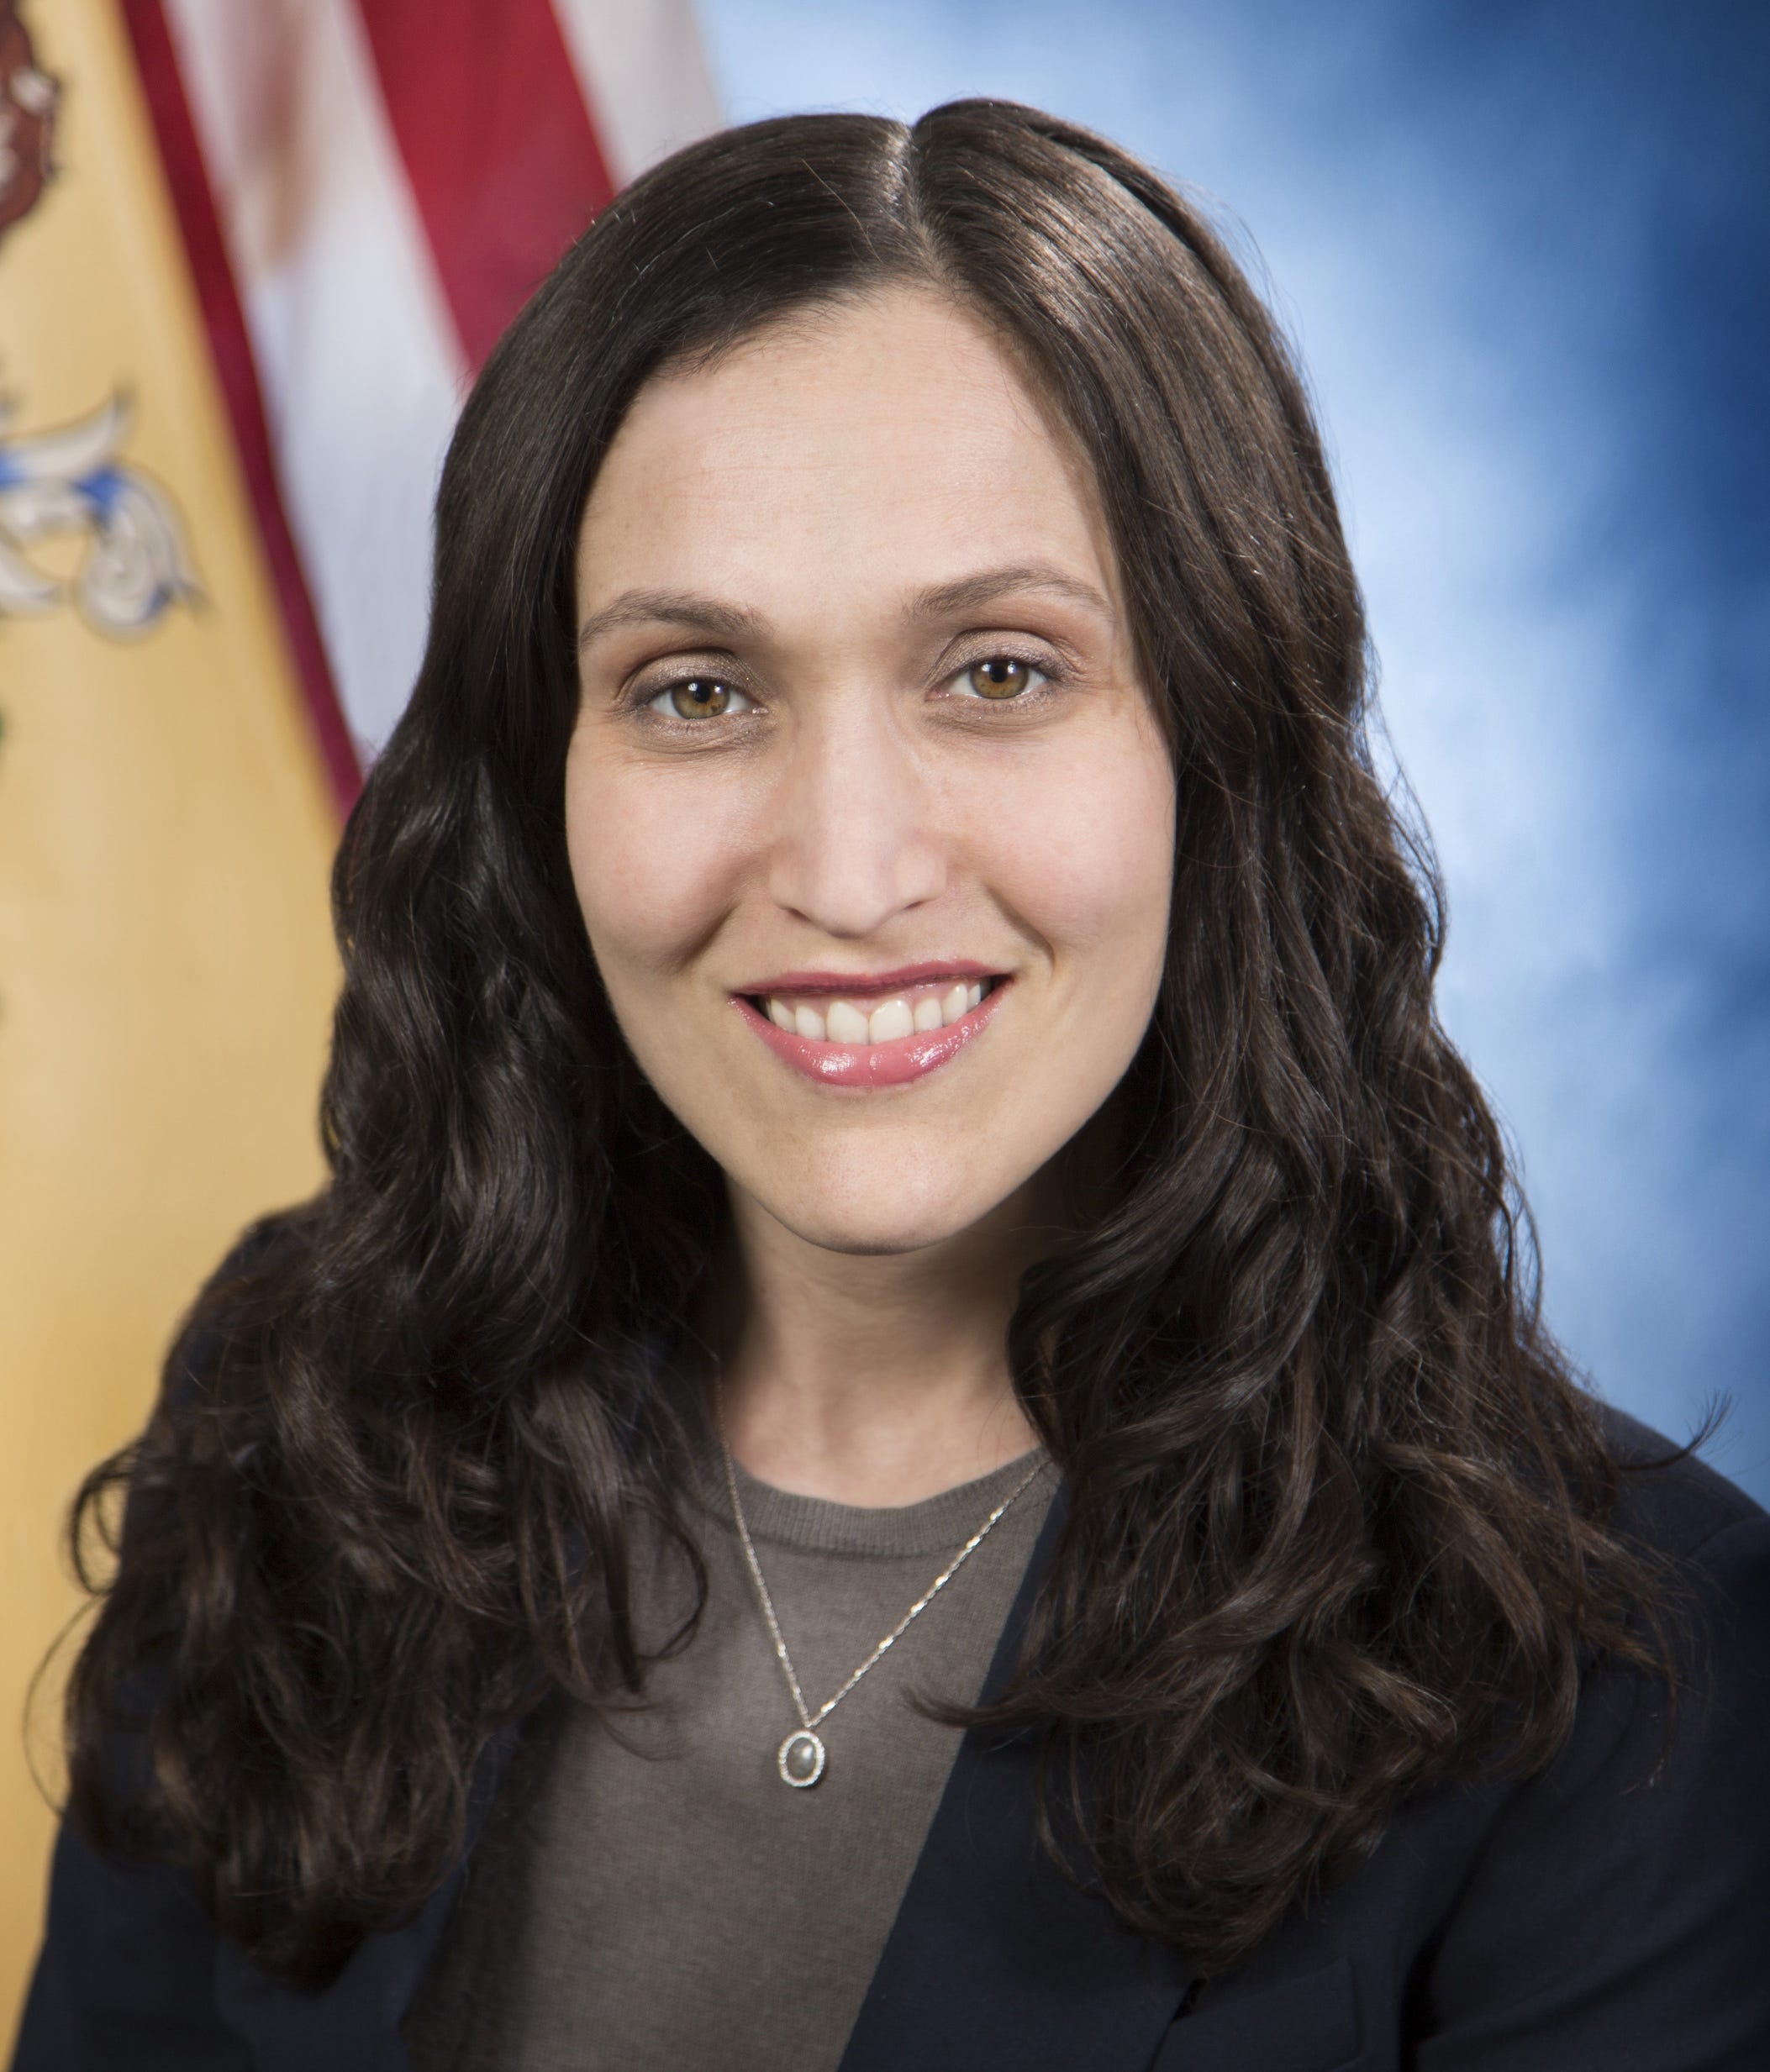 Division on Civil Rights Director Rachel Wainer Apter, who oversees the Law Against Discrimination, was tapped recently for a seat on the state supreme court. State officials declined to make another official available for an interview with the Press.